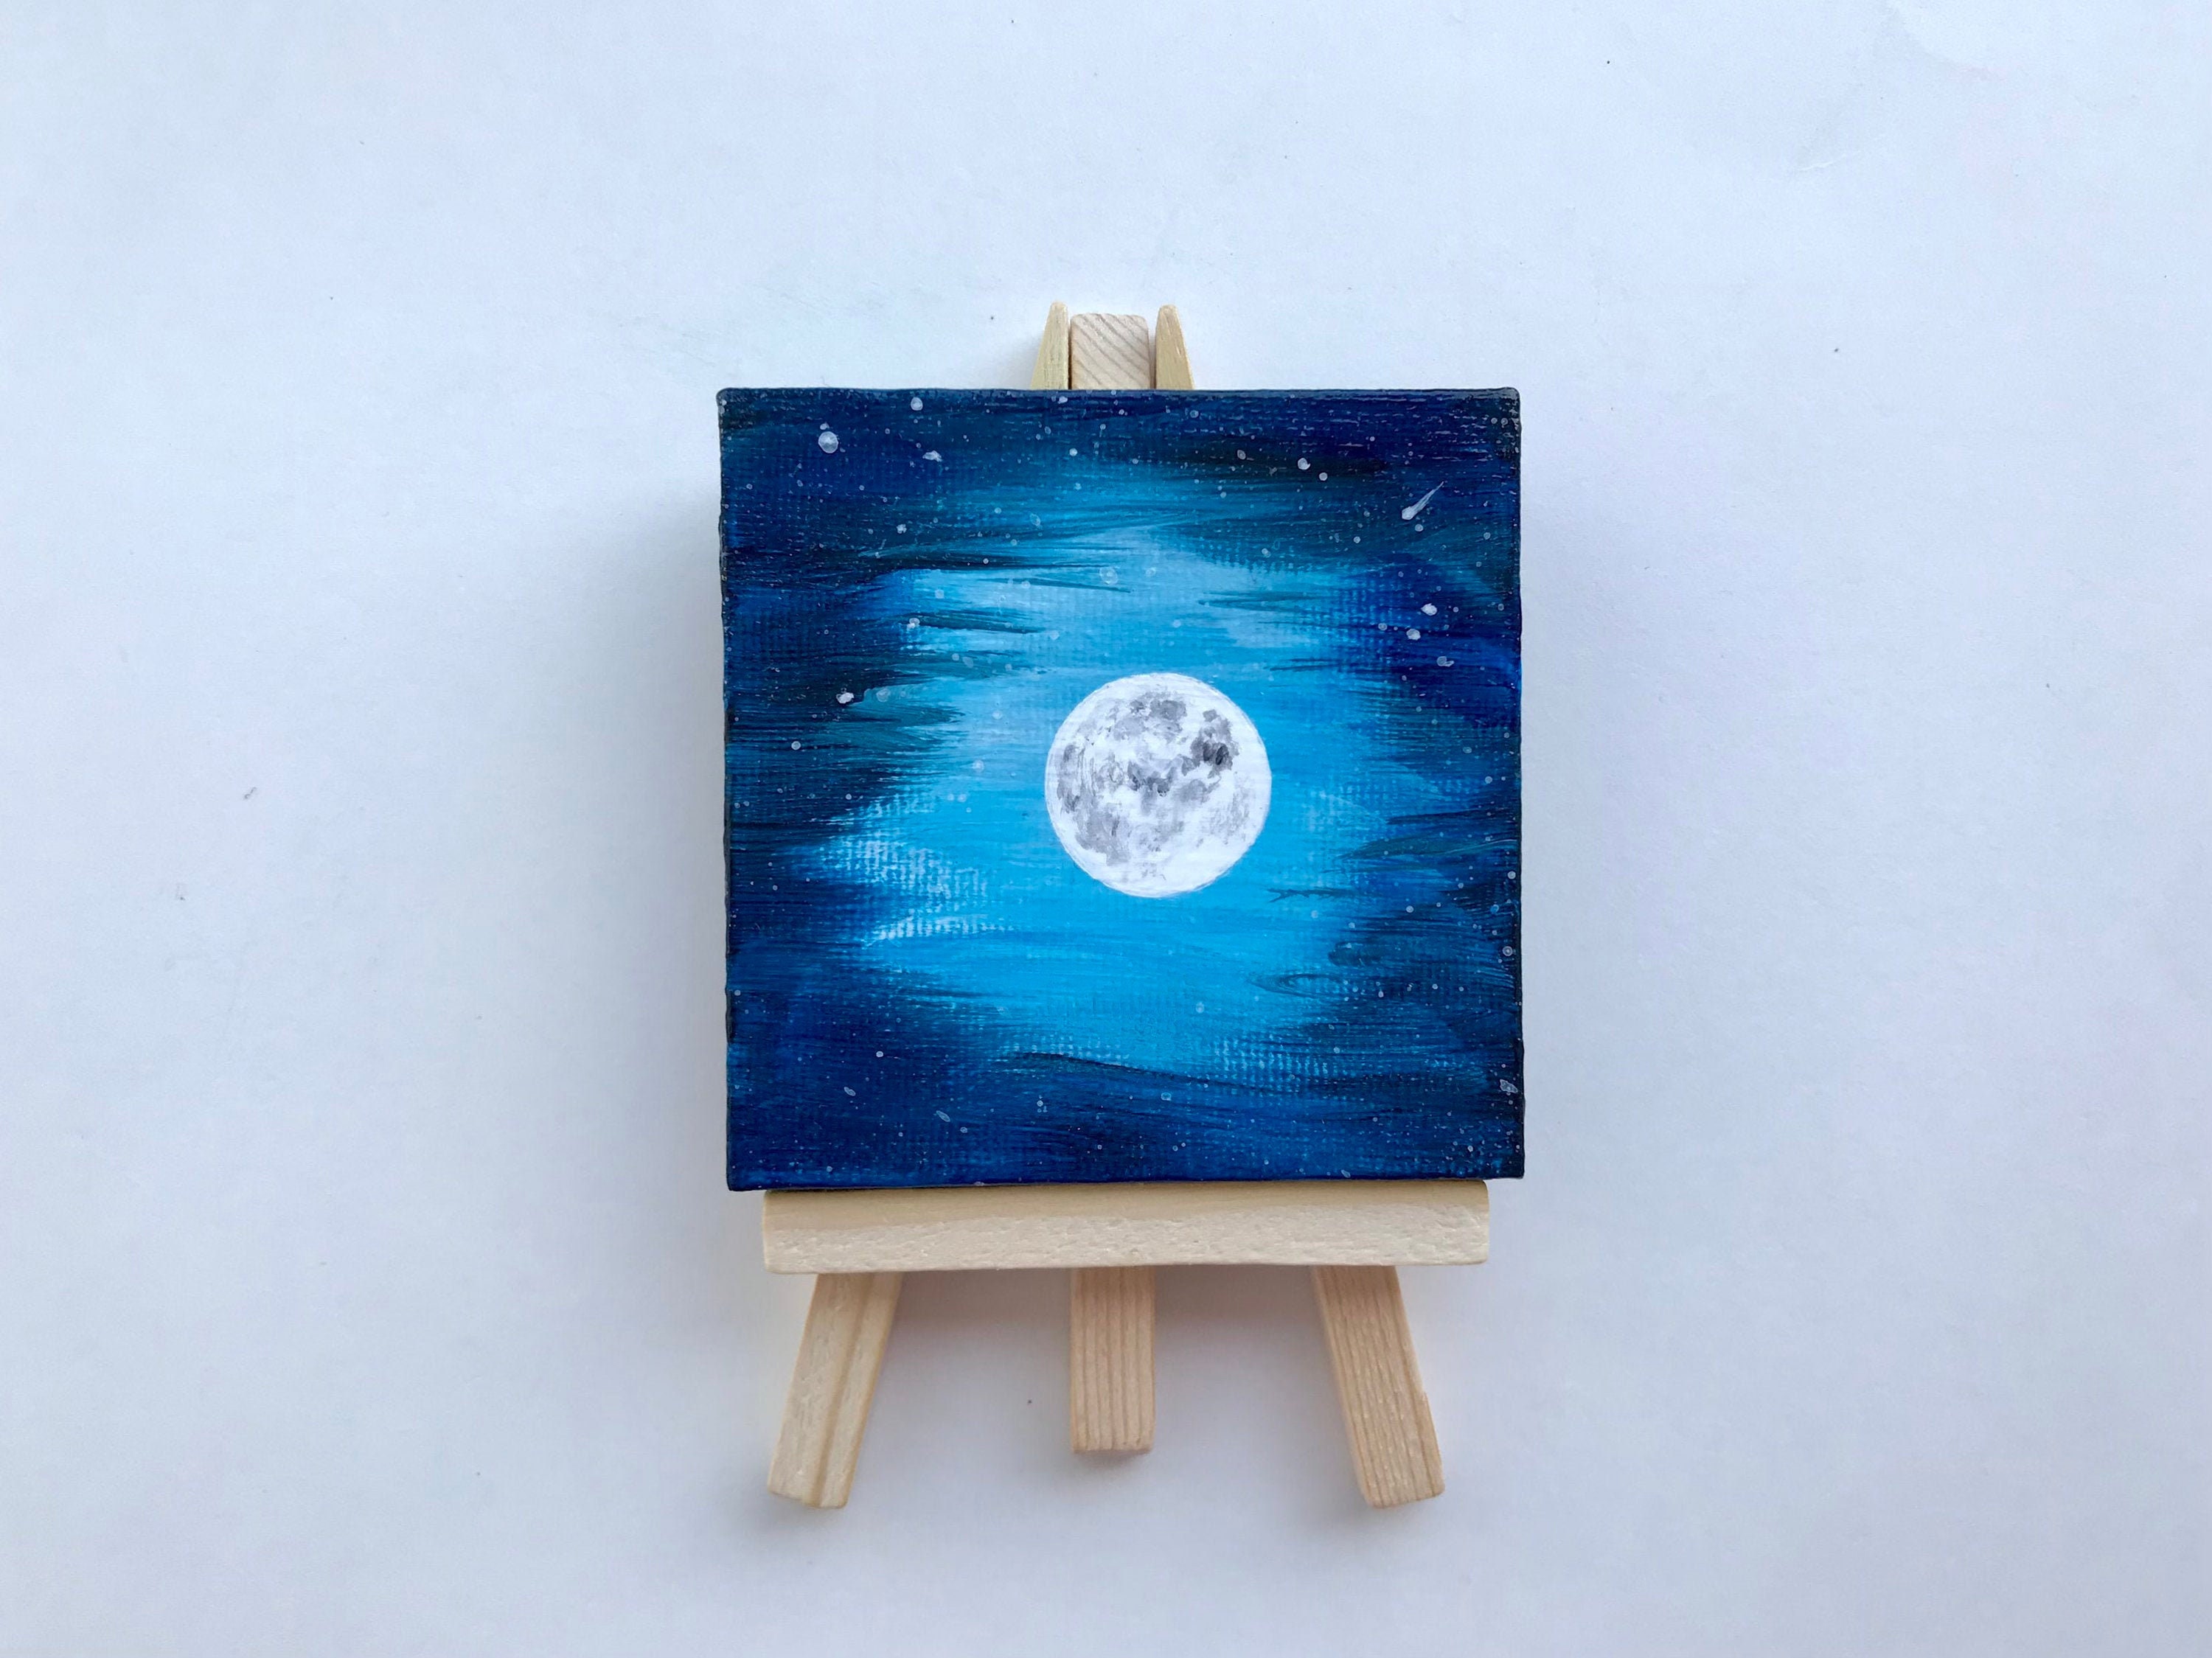 Small 4x4 Original Painting on Canvas, Art for Small Spaces, Acrylic  Painting, Whimsical Landscape, Moon and Stars Painting 